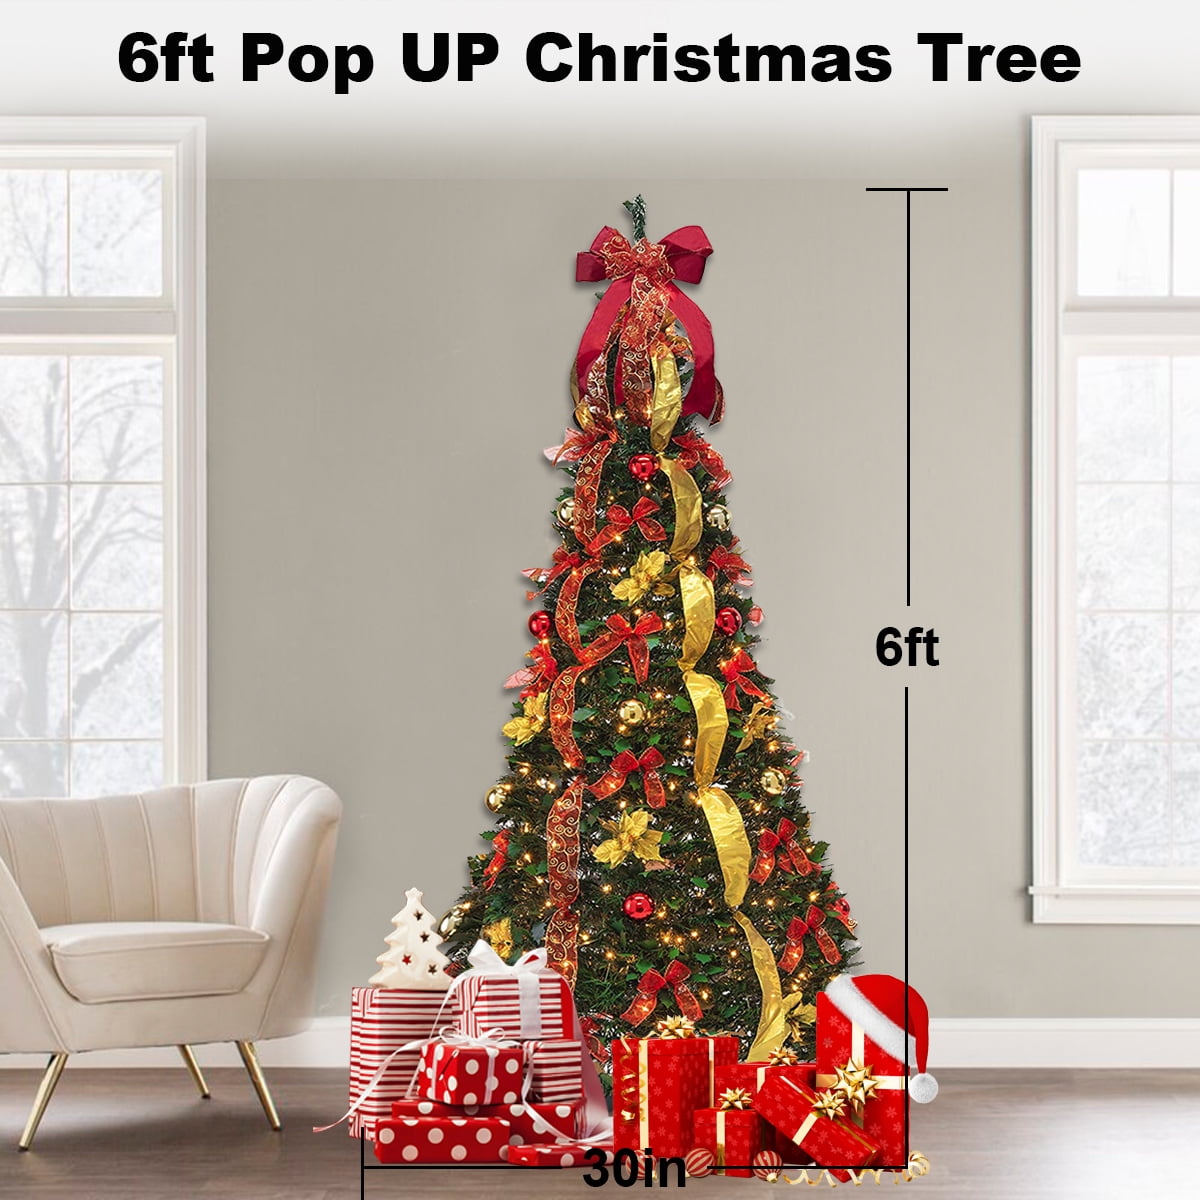 6 FT PULL UP DECORATED & PRE LIT COLLAPSIBLE POP UP CHRISTMAS TREE 200 LIGHTS 